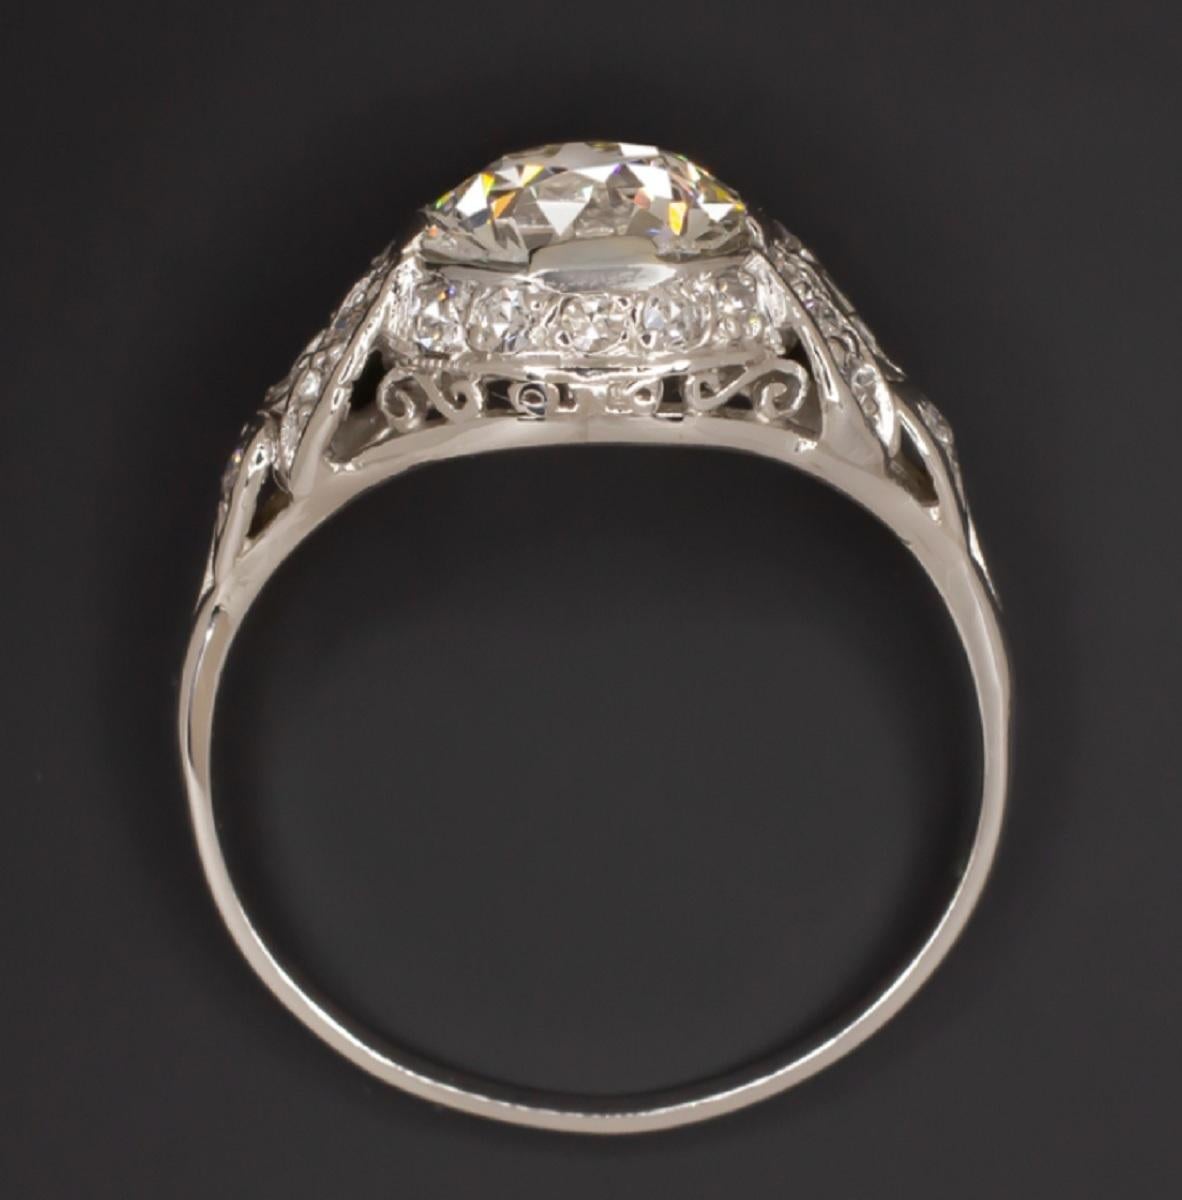 Art Deco style engagement ring features a phenomenally brilliant and high quality 1.86ct old European cut diamond complemented by a richly detailed diamond encrusted platinum setting. The 1.86ct certified center diamond is impressively large,